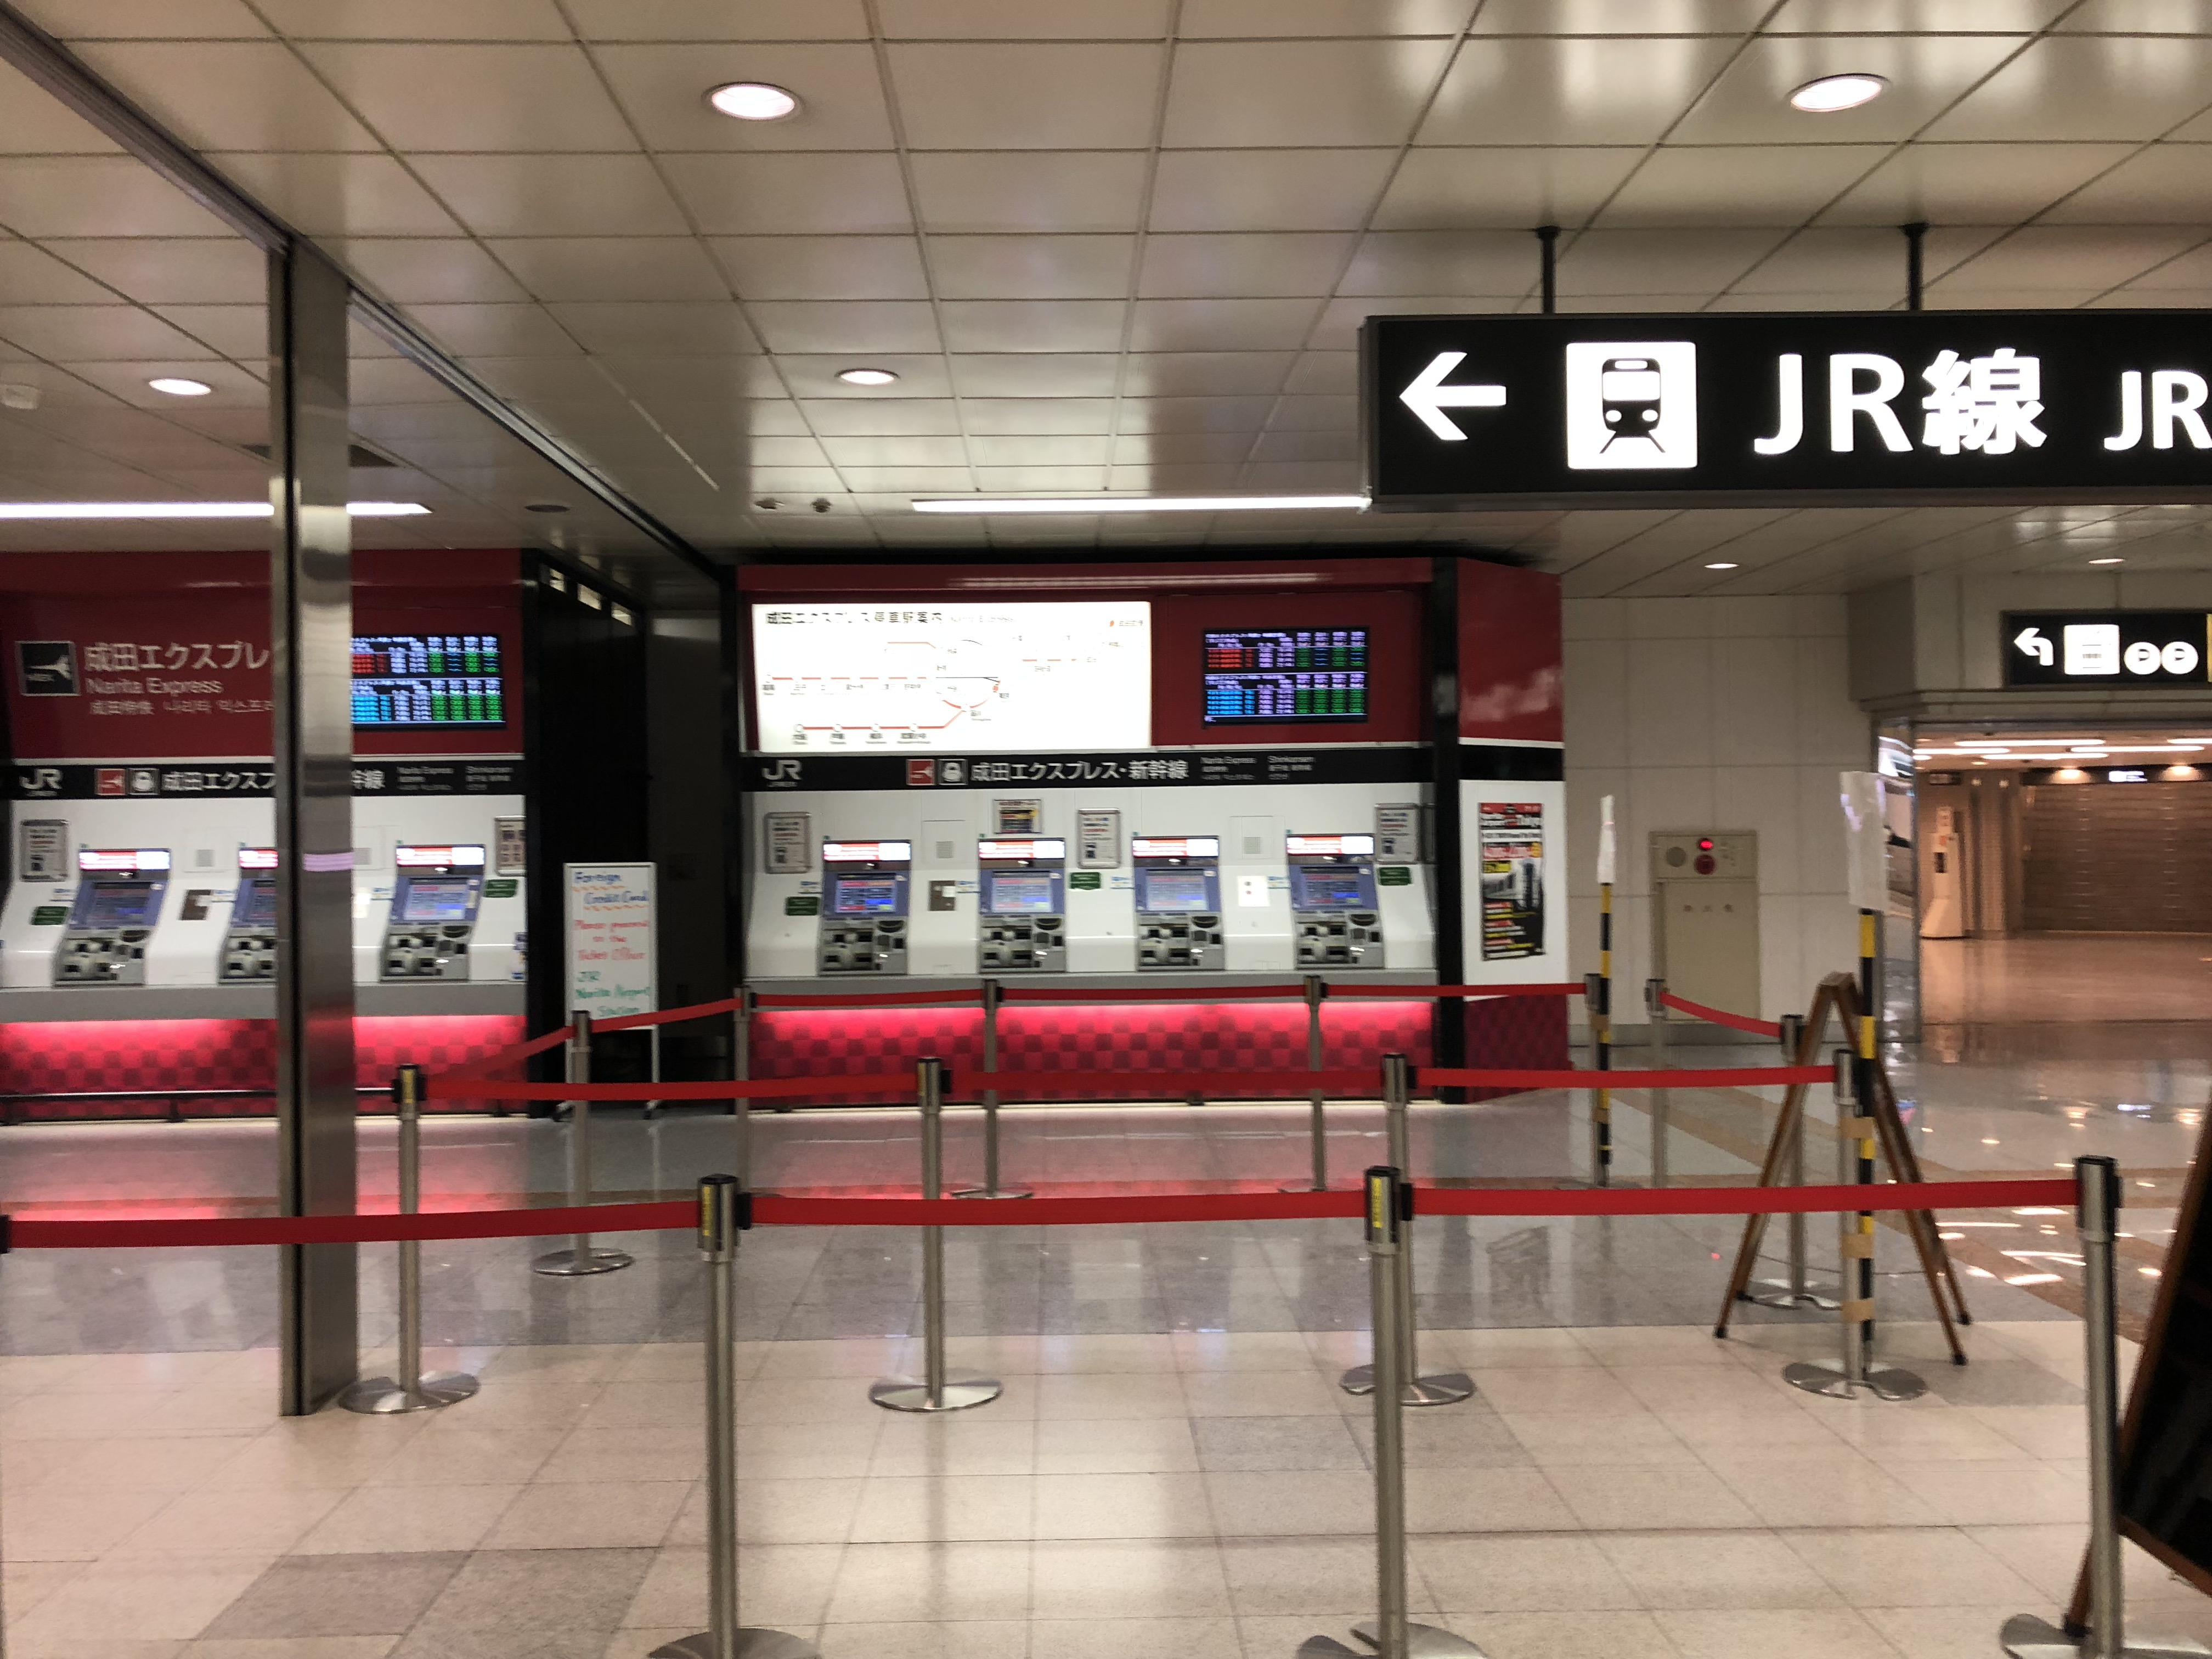 At any rate, I want to go to Tokyo station by Narita Express!!  How to buy a ticket with a ticket machine?